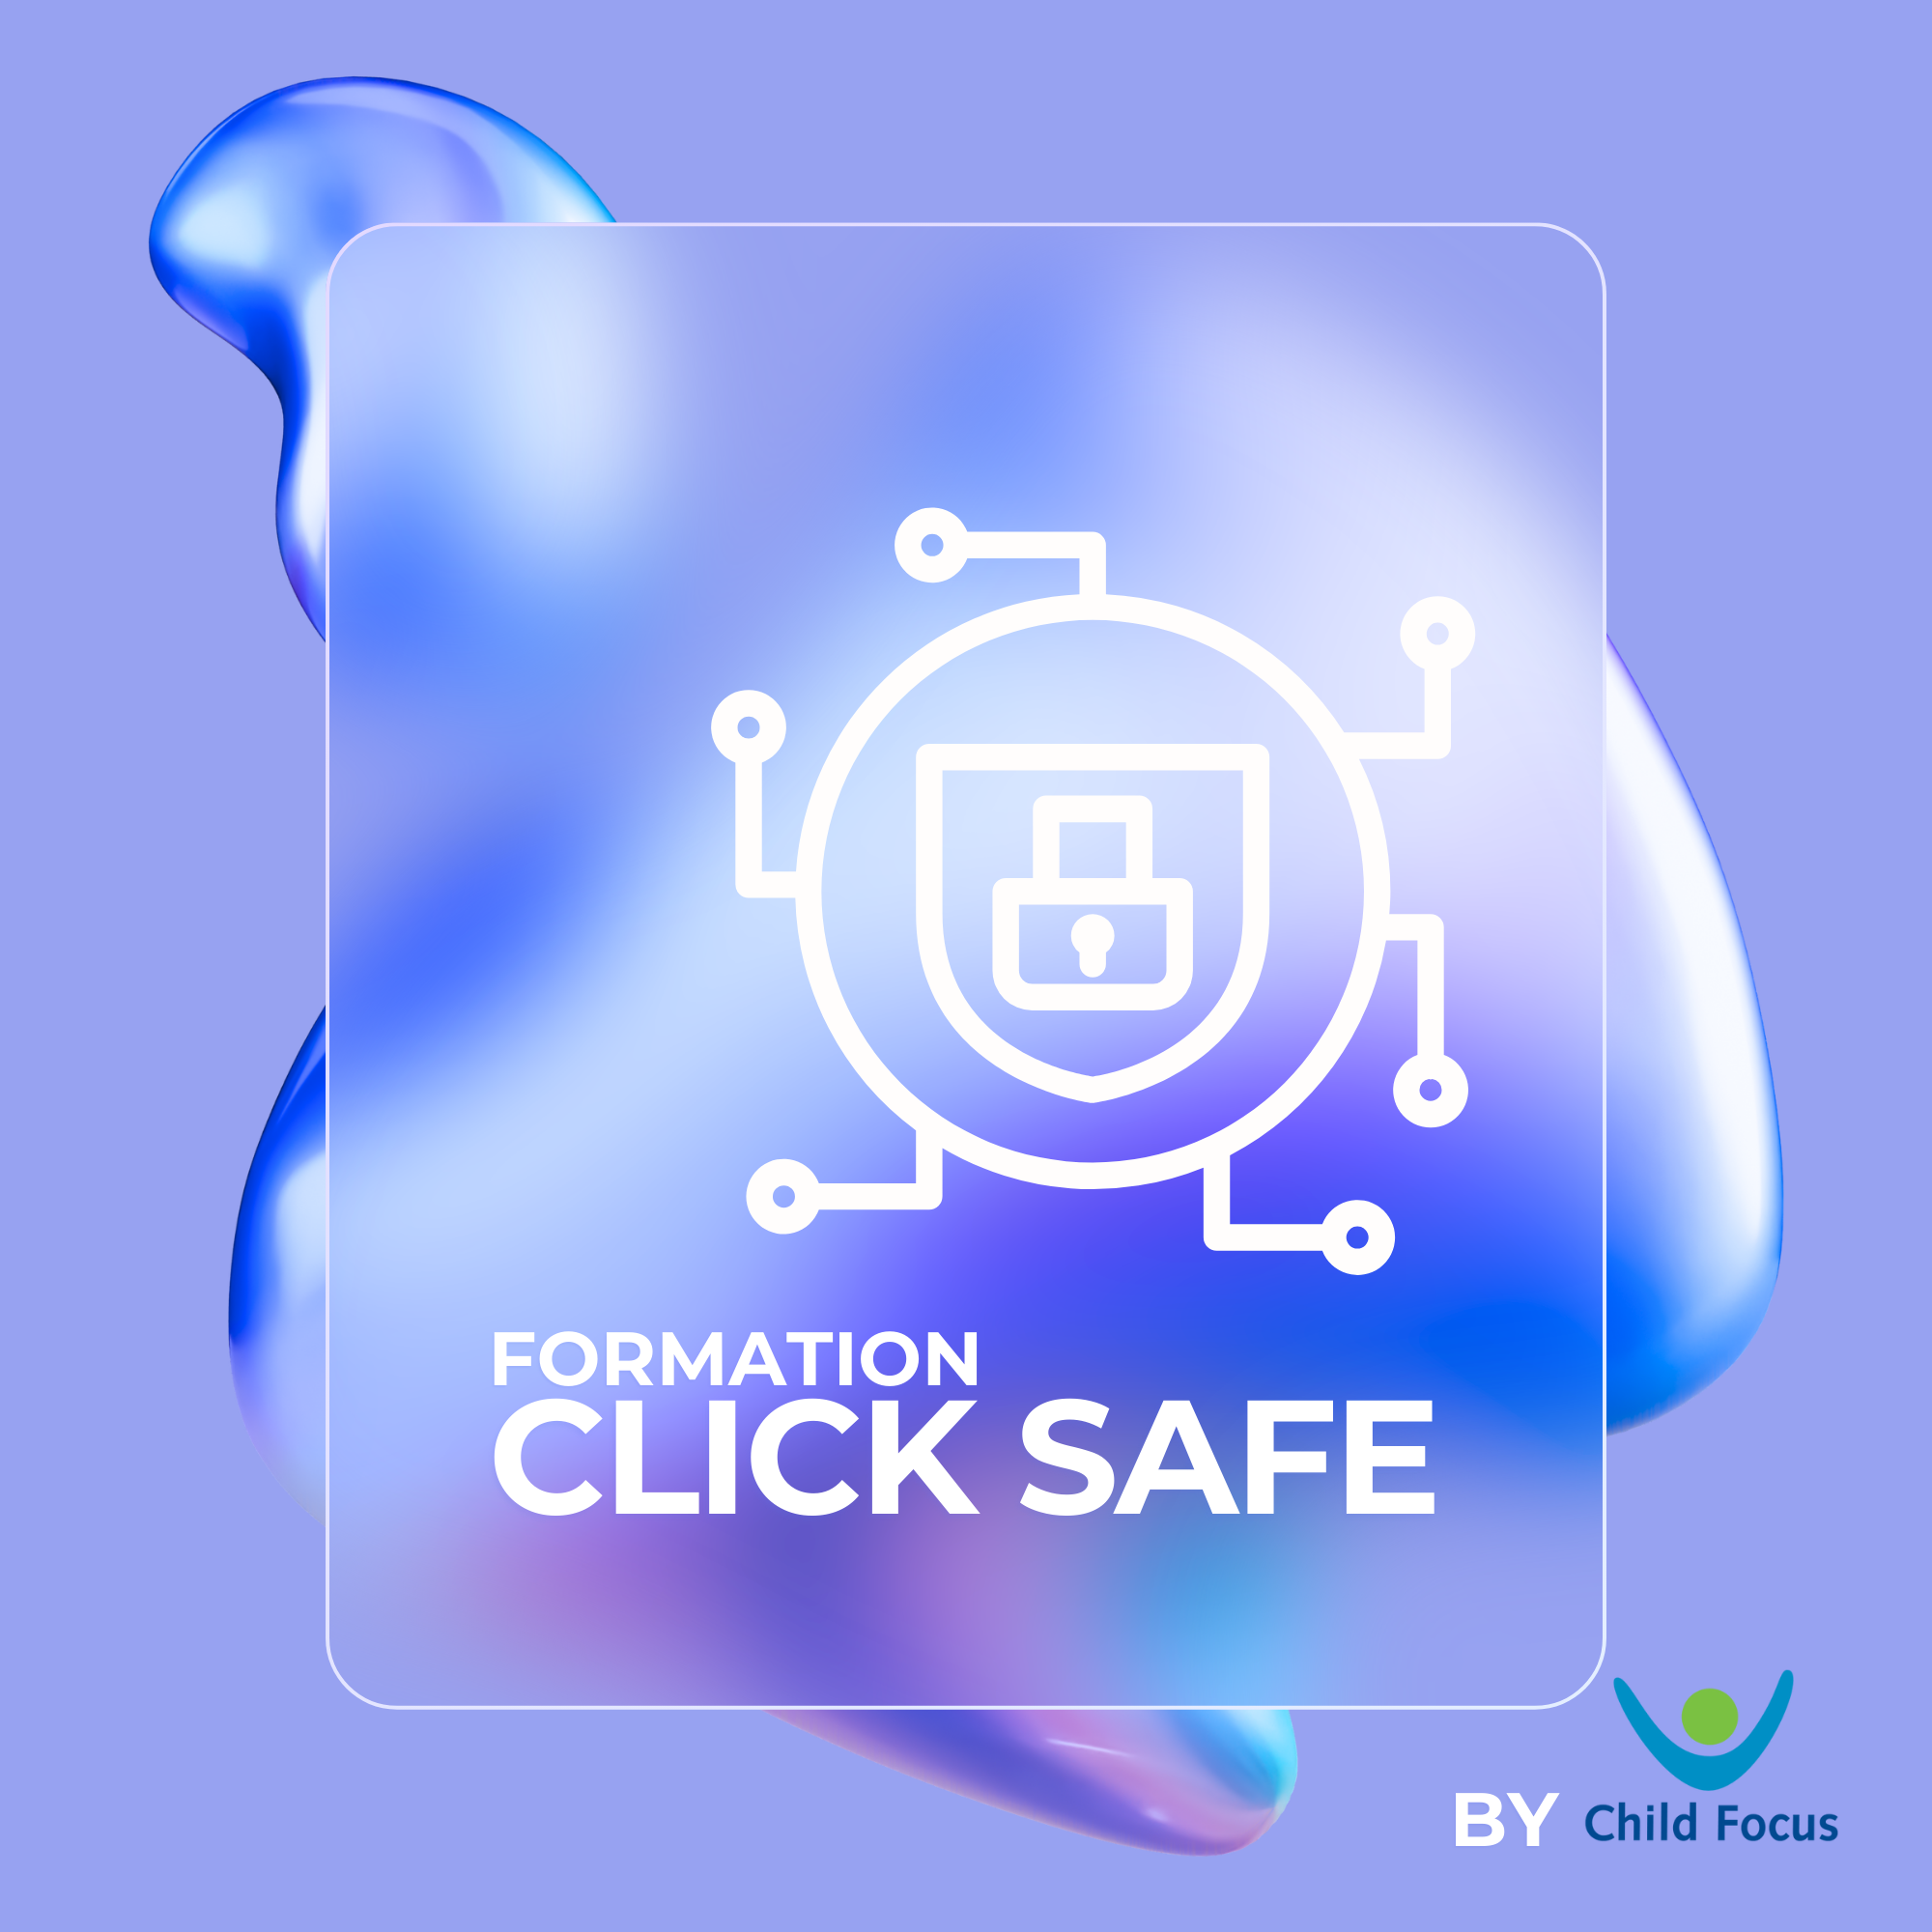 Formation Click Safe by Child Focus